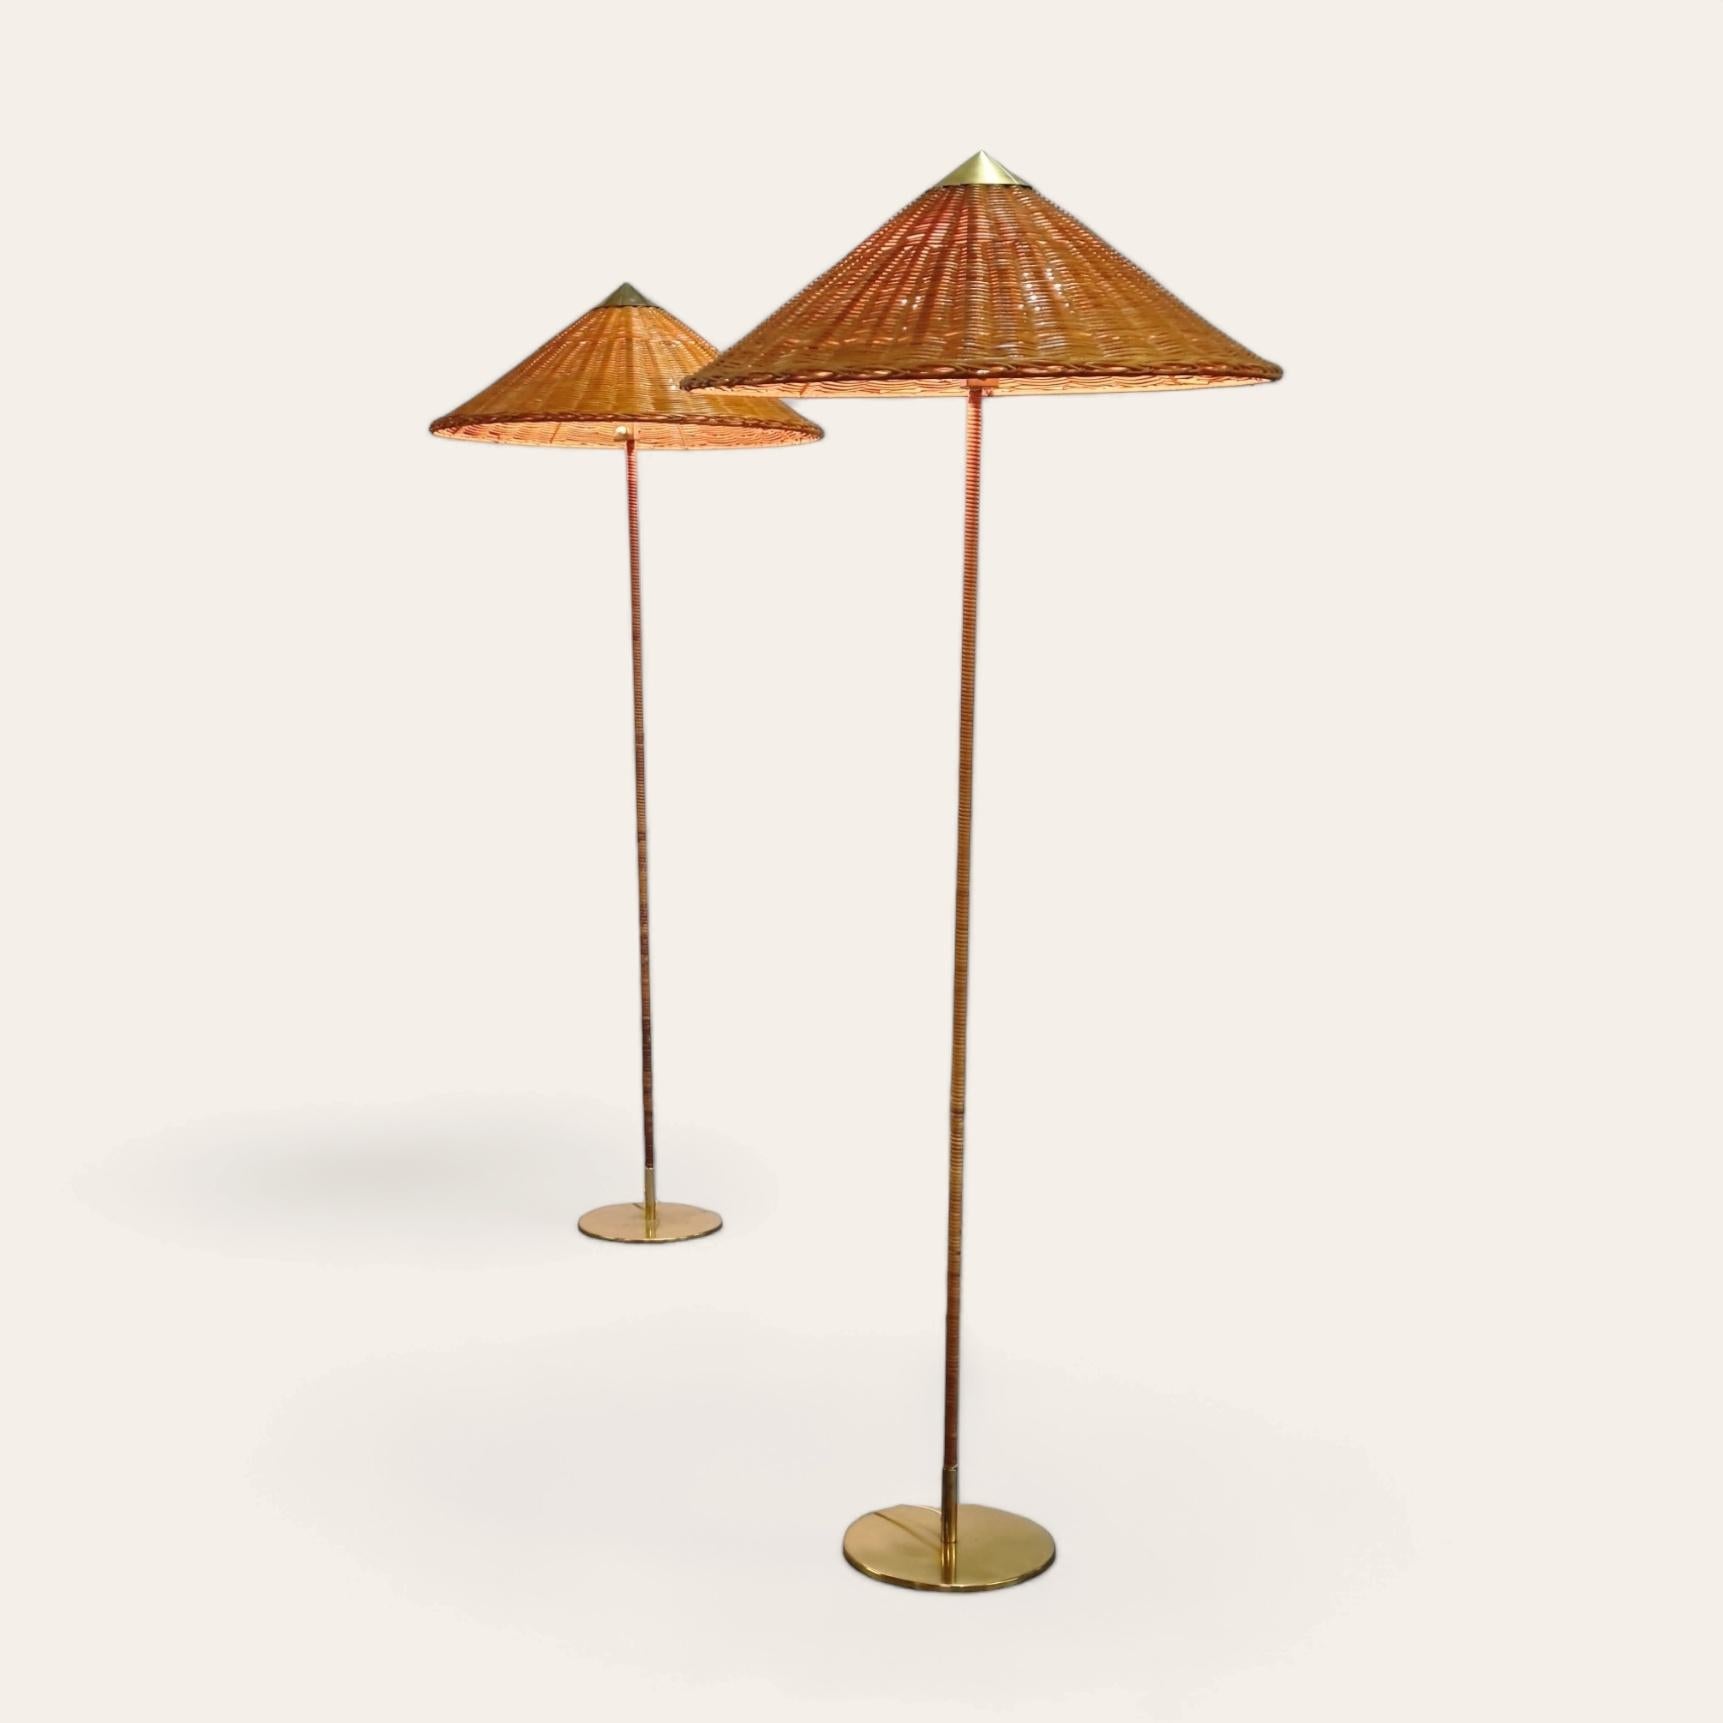 A beautiful pair of the highly sought after Paavo Tynell floor lamps model 9602 aka Chinese hat for Idman.

This iconic floor lamp was originally designed by Paavo Tynell in the late 1930s and has been refined during the golden era of the Tynell